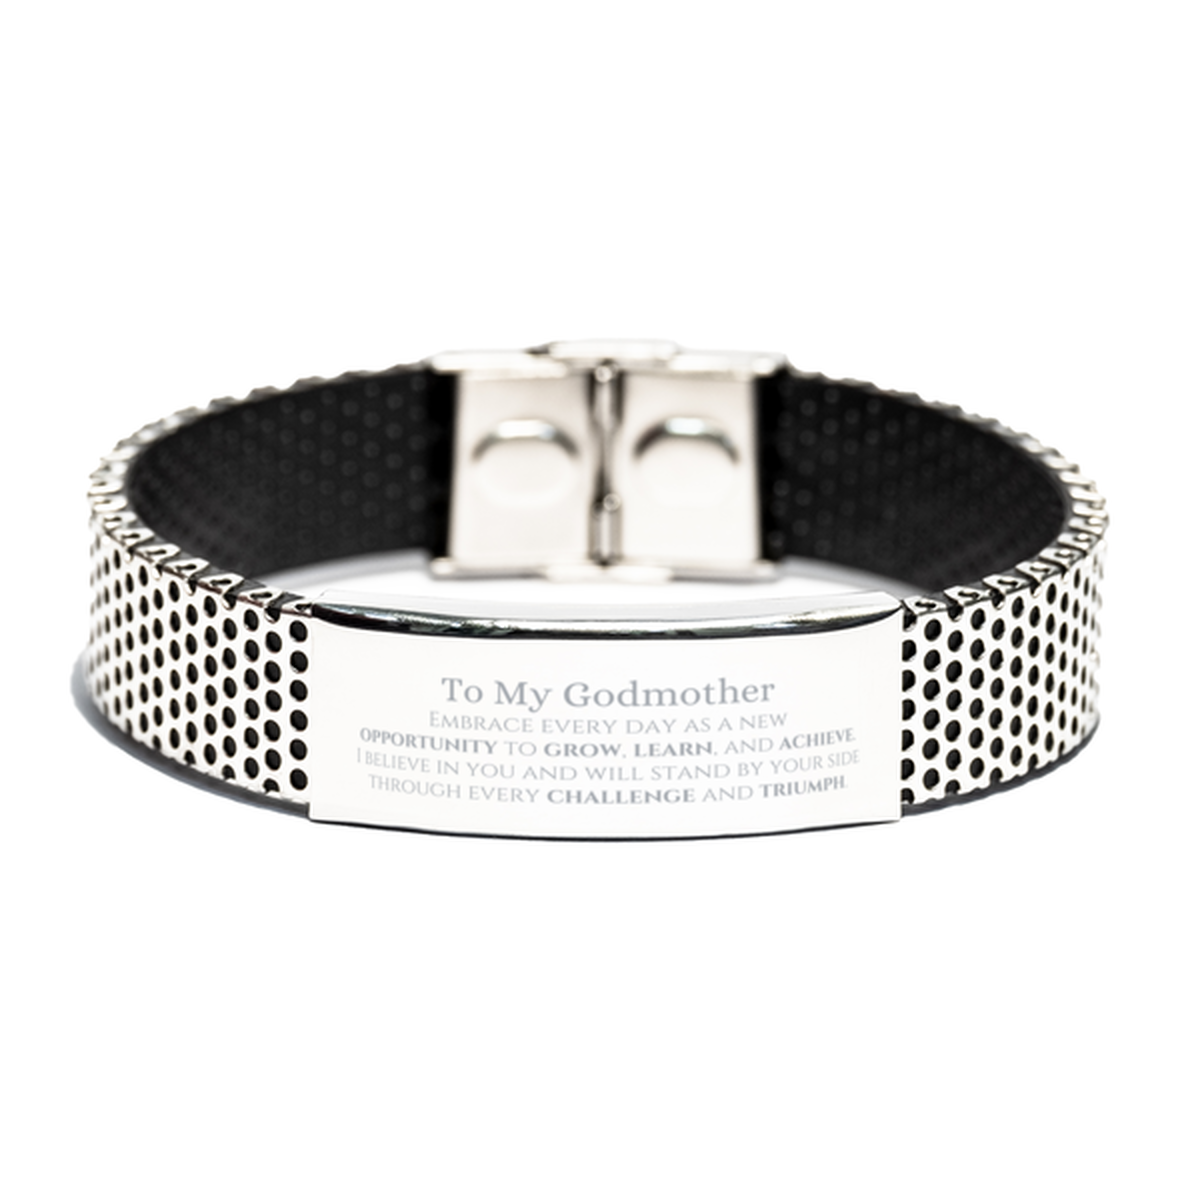 To My Godmother Gifts, I believe in you and will stand by your side, Inspirational Stainless Steel Bracelet For Godmother, Birthday Christmas Motivational Godmother Gifts